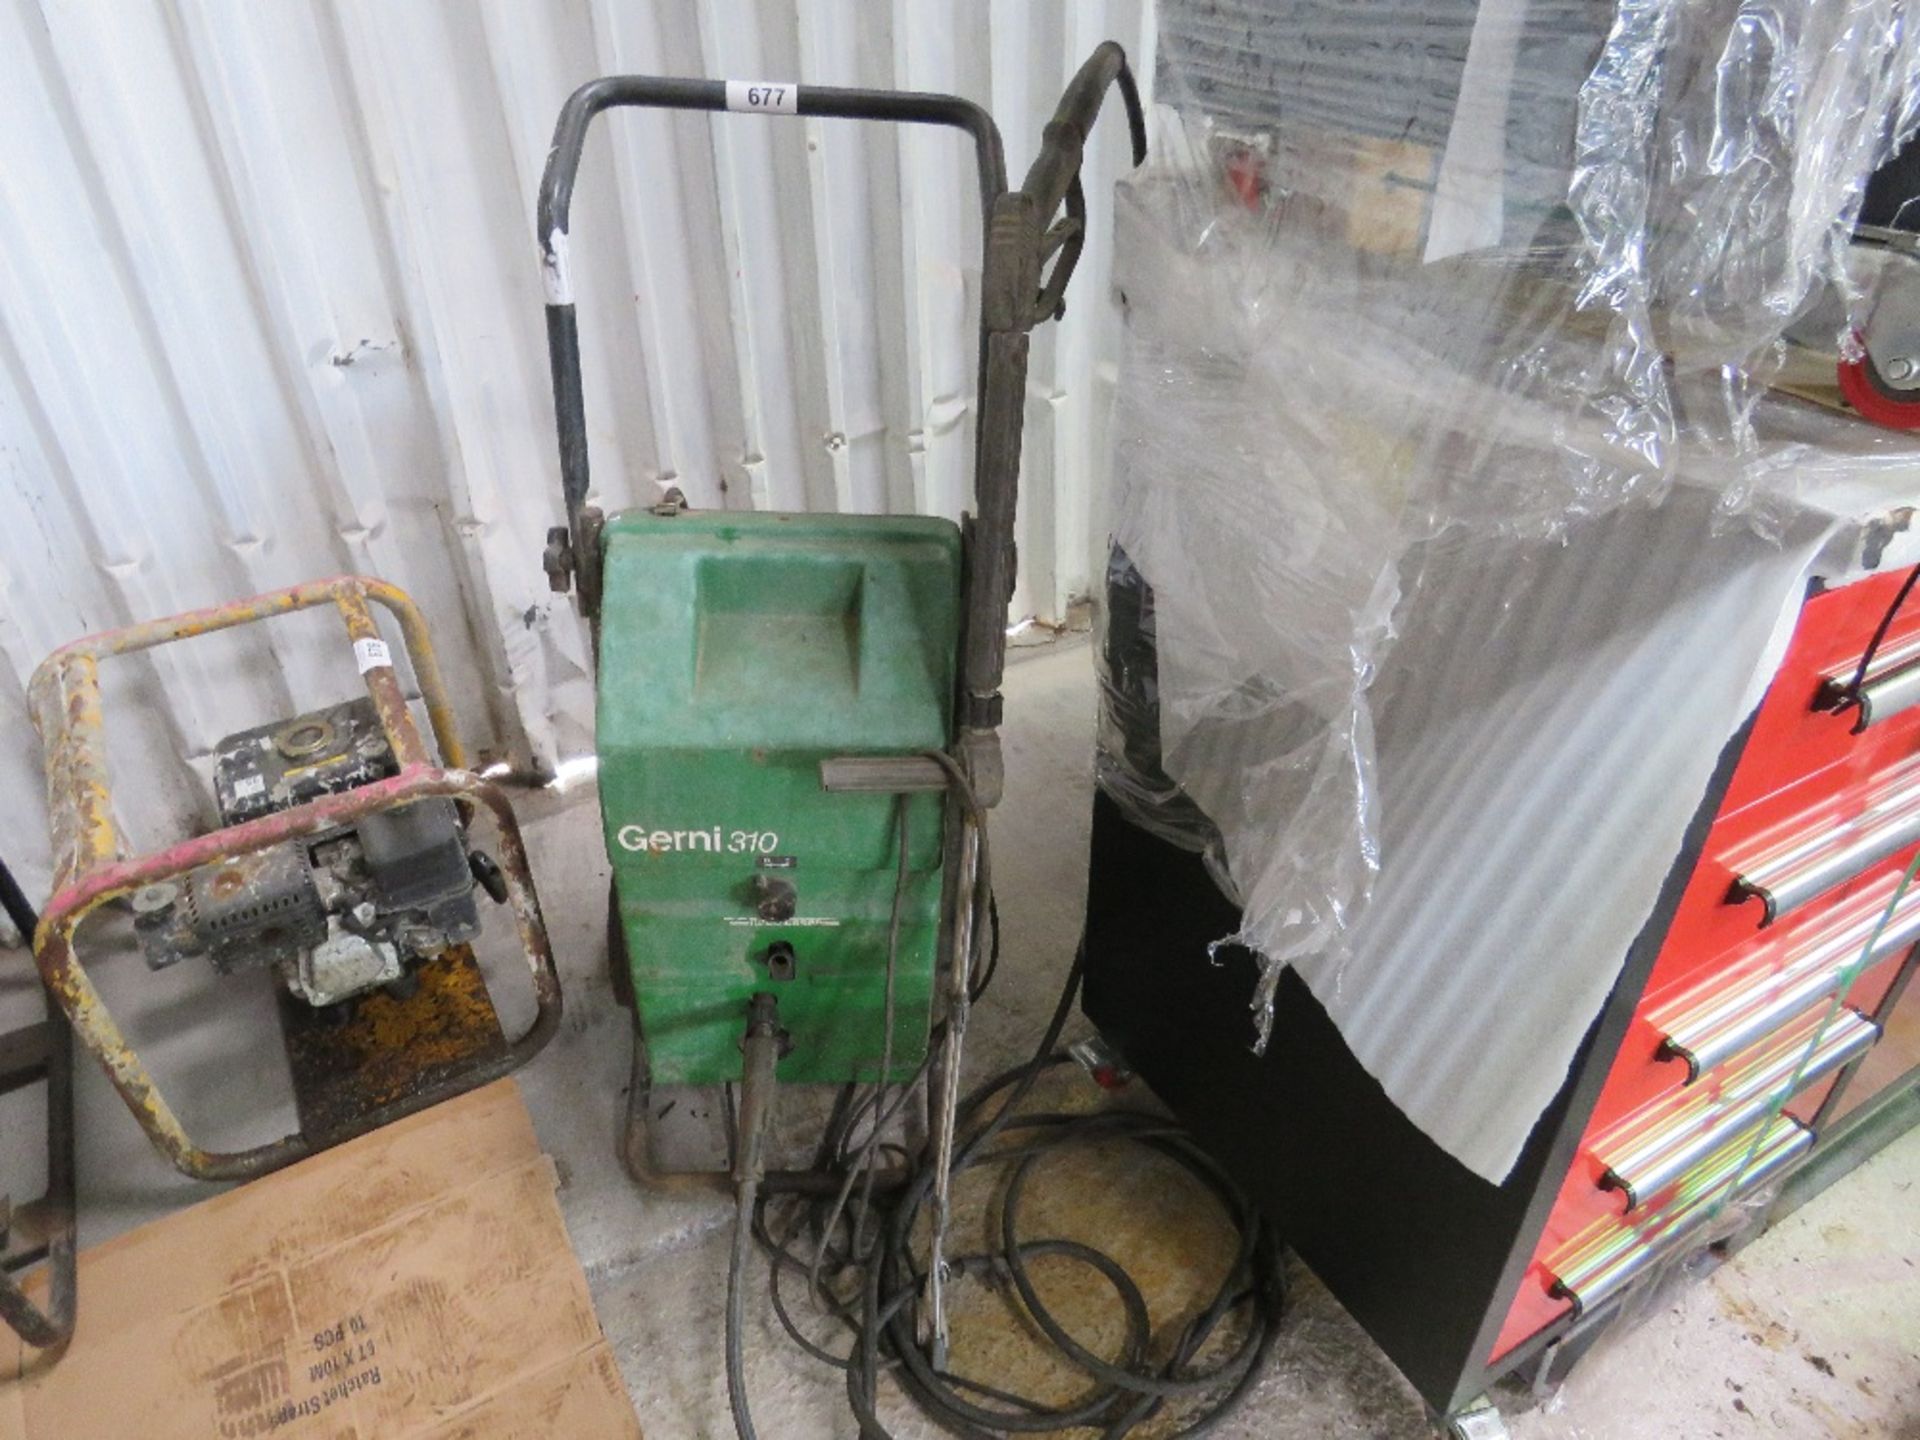 GERNI 310 MODEL 240VOLT PRESSURE WASHER WITH HOSE AND LANCE. THIS LOT IS SOLD UNDER THE AUCTIONEERS